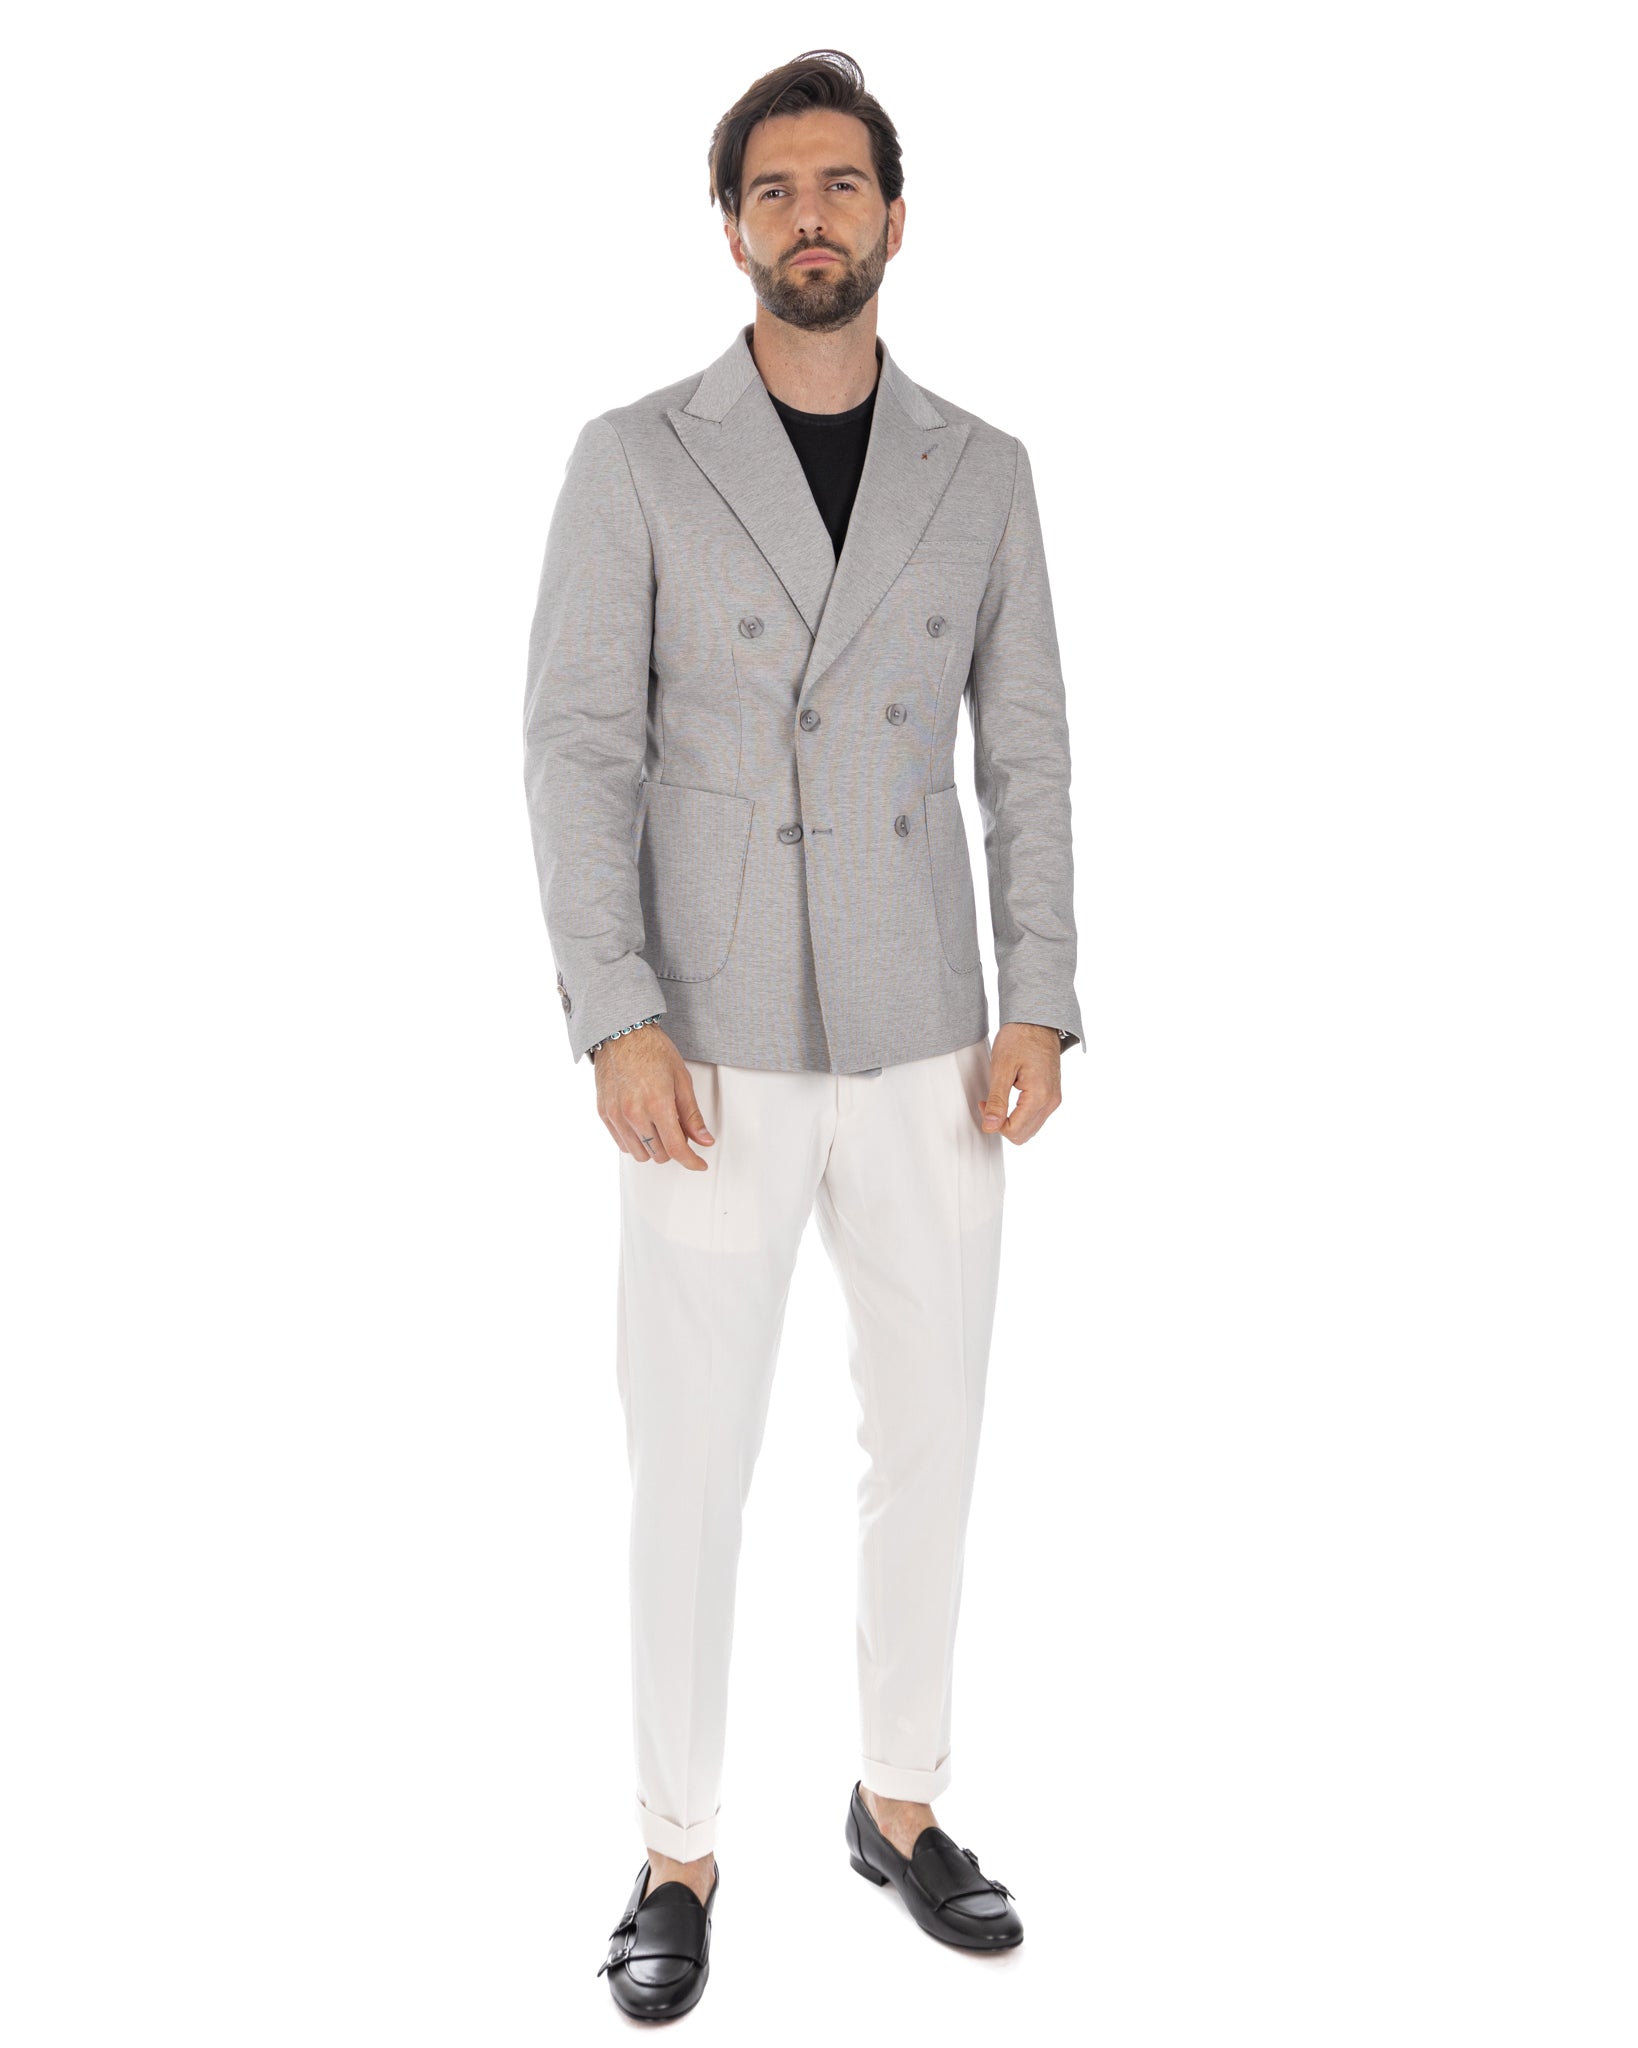 Ostuni - gray double-breasted jacket